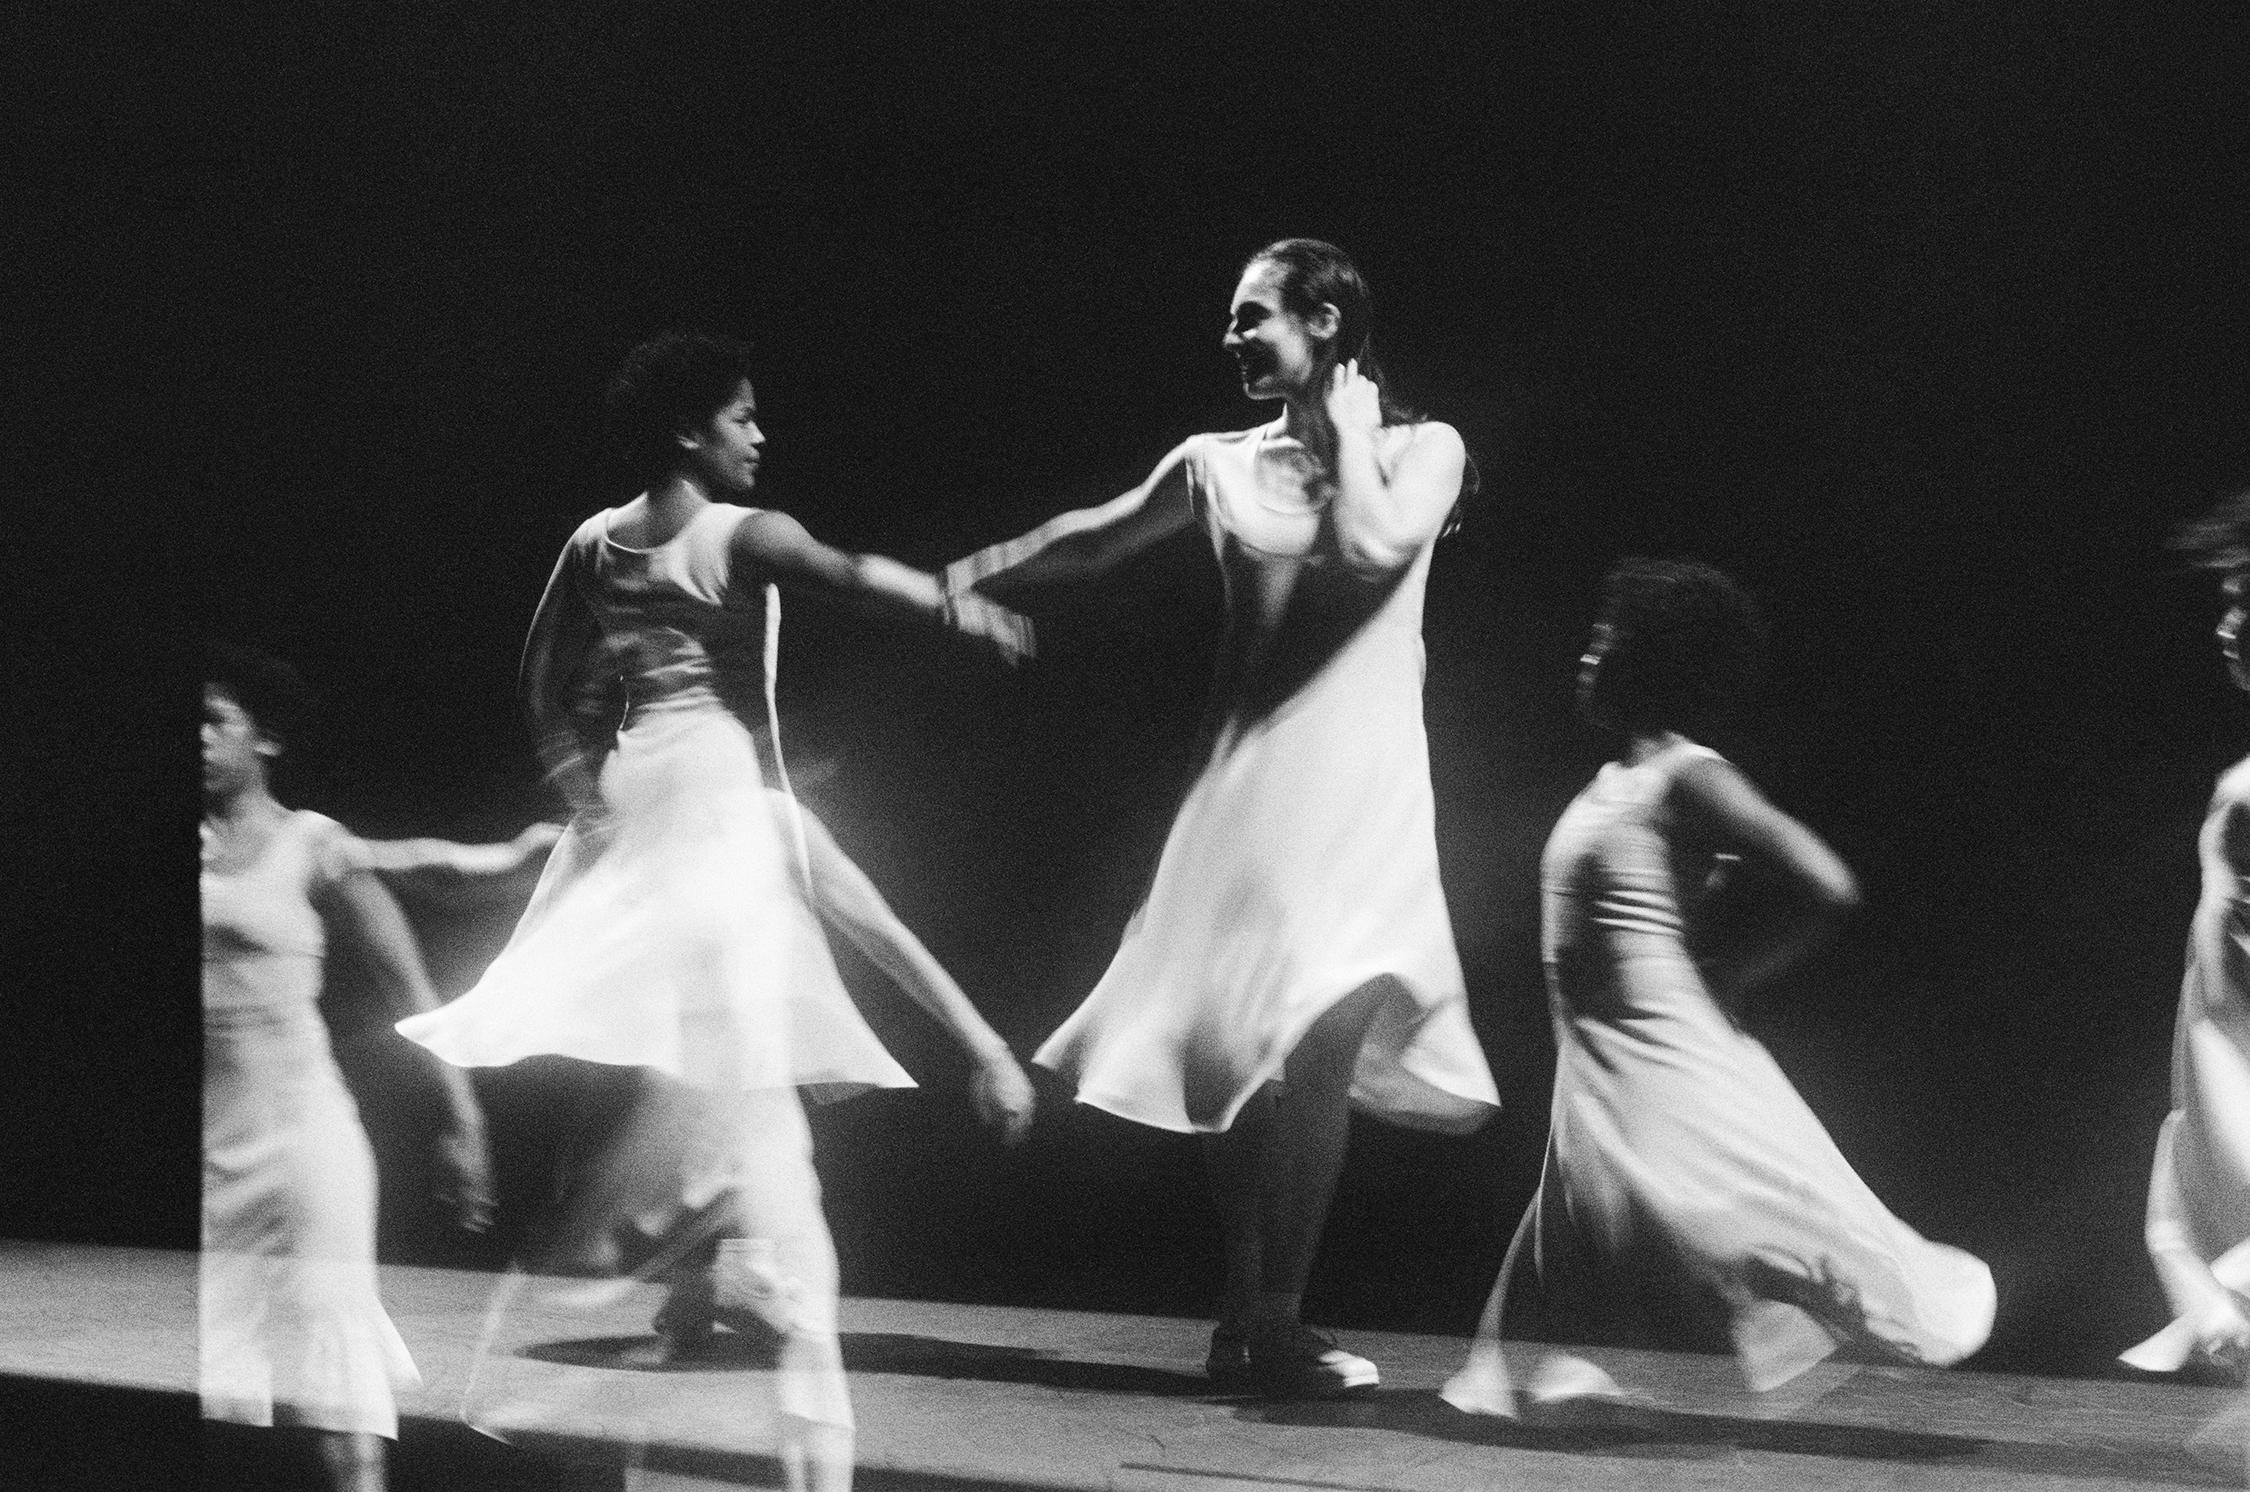 Dancers in white dresses against a black background